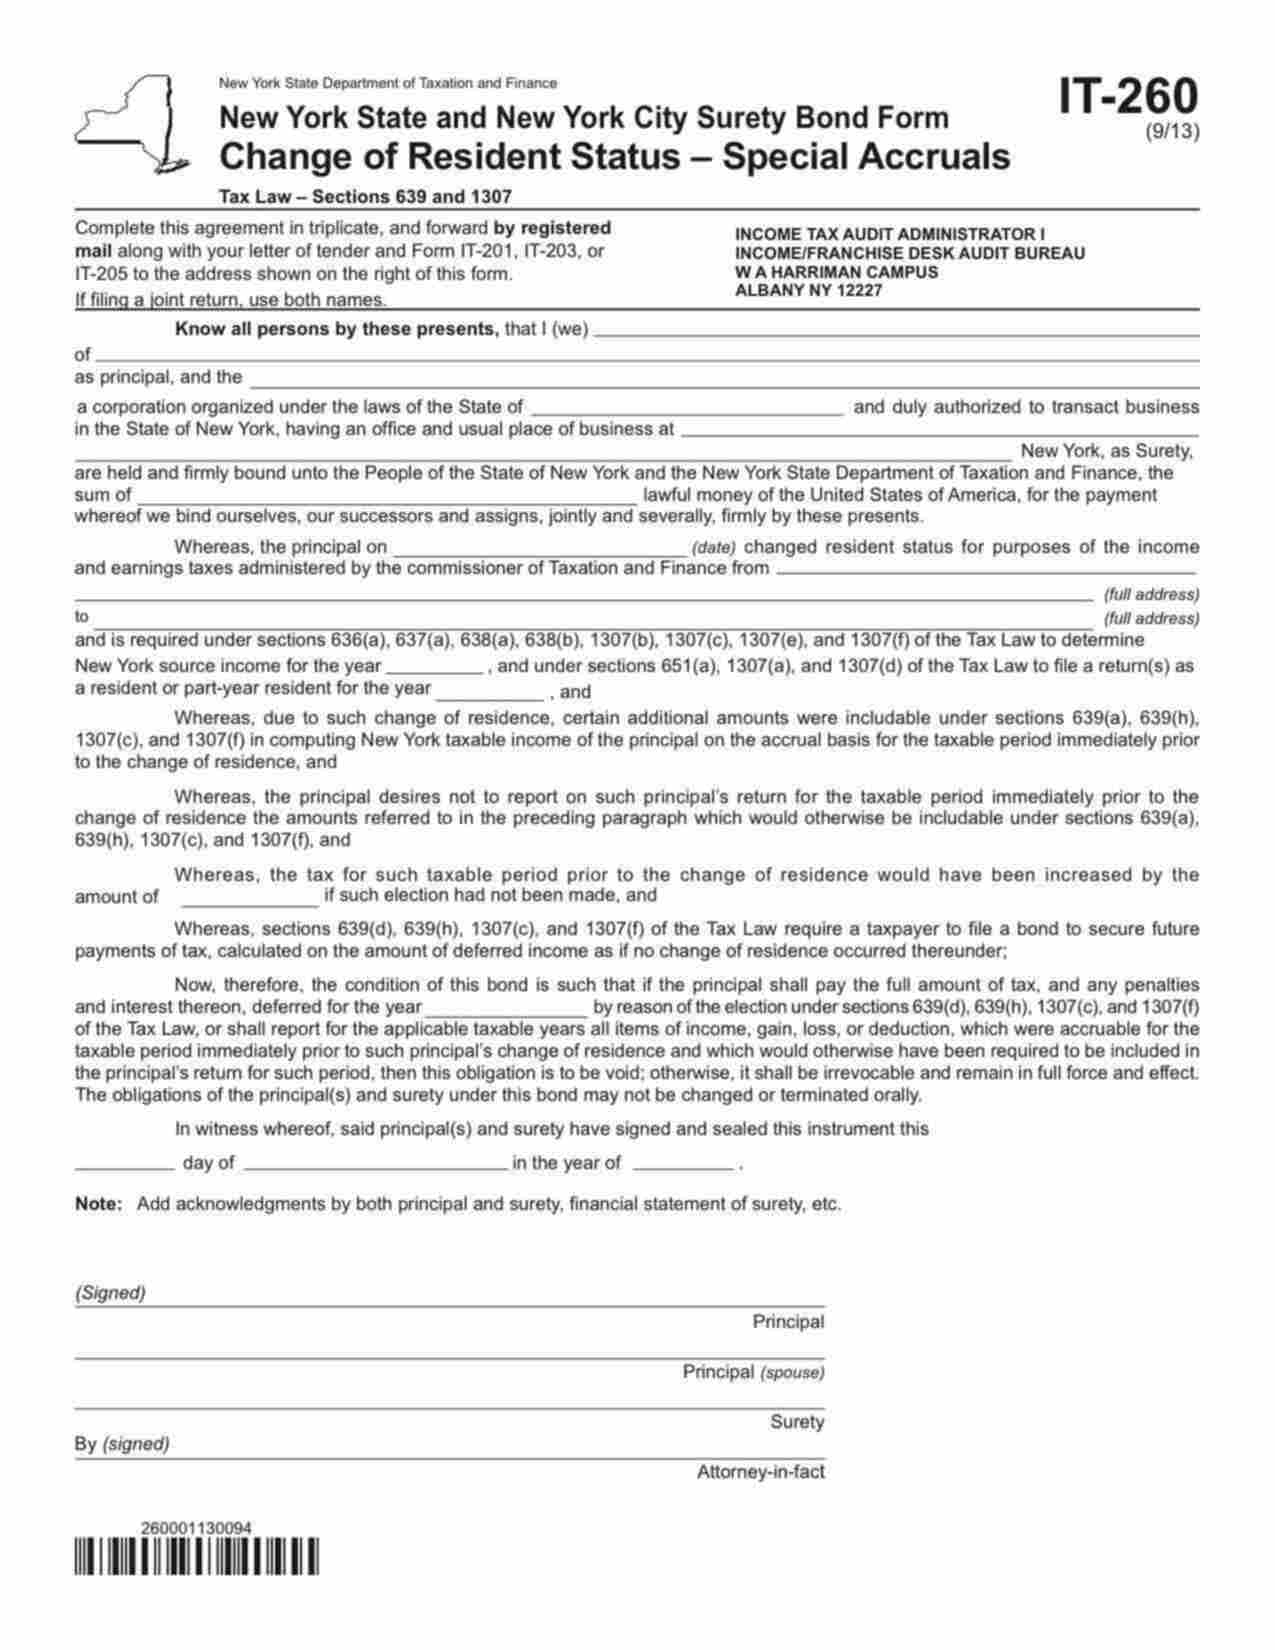 New York Change of Resident Status - Special Accruals Bond Form